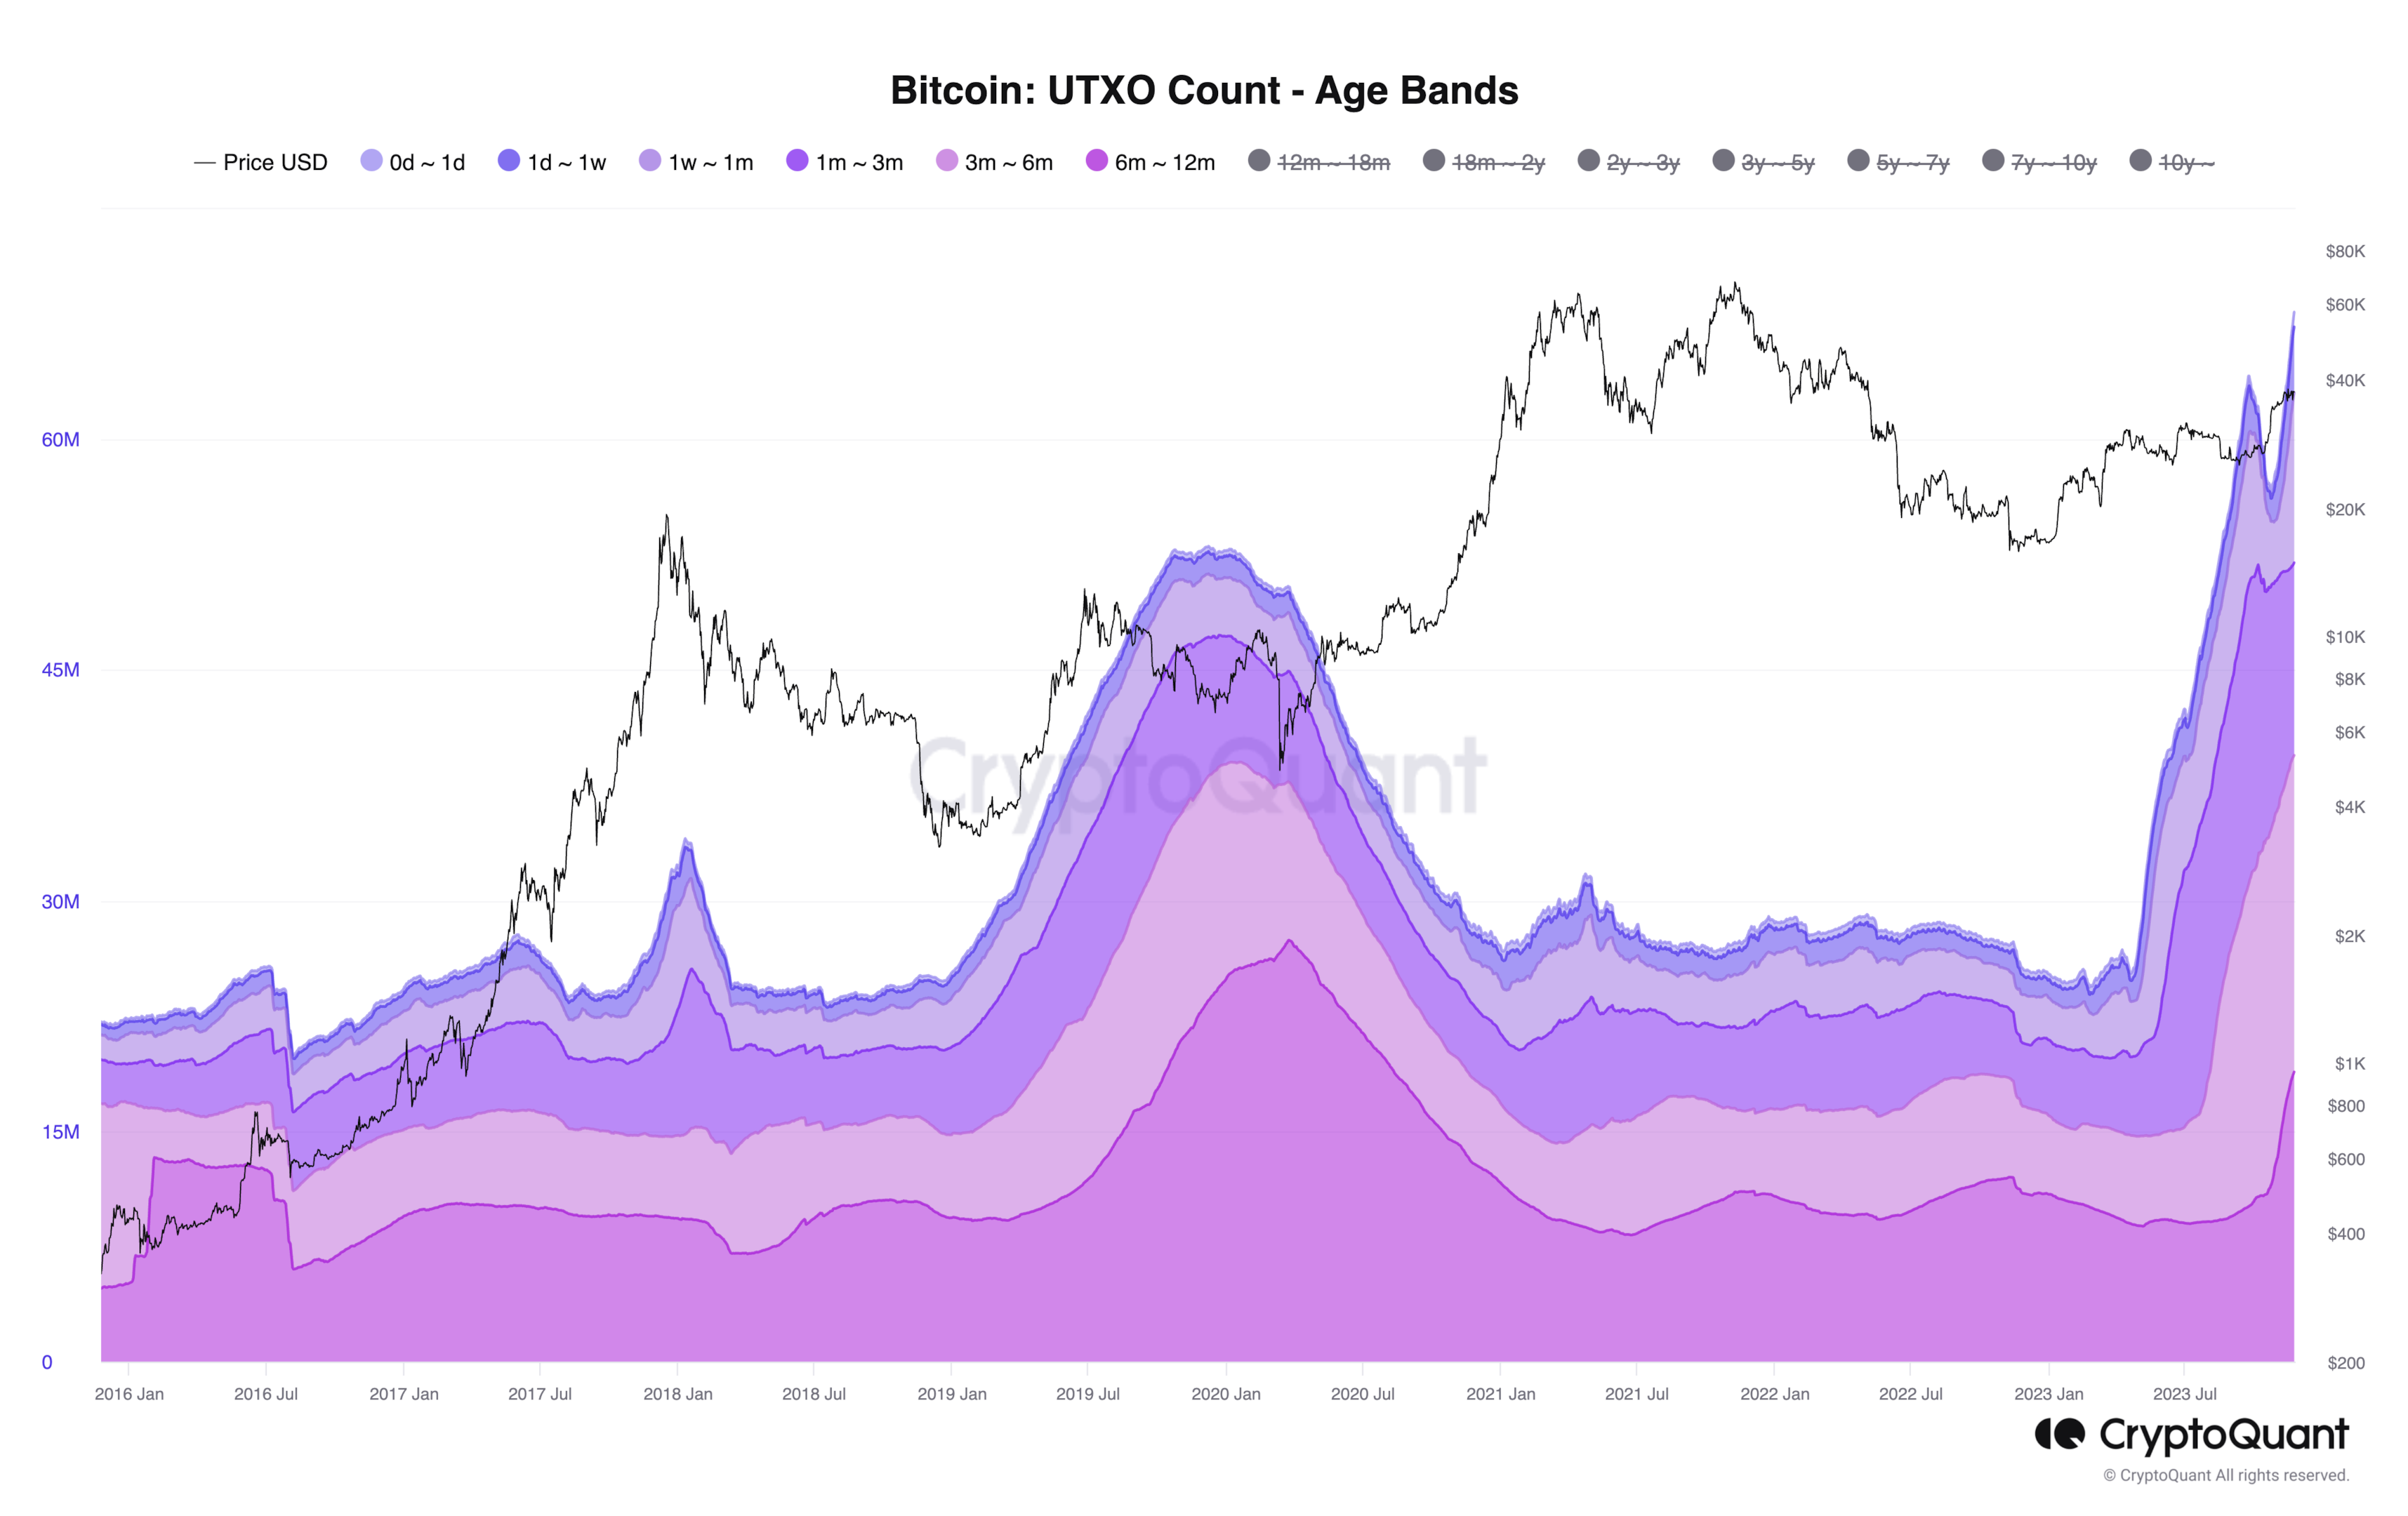 Bitcoin: UTXO Count - Age Bands